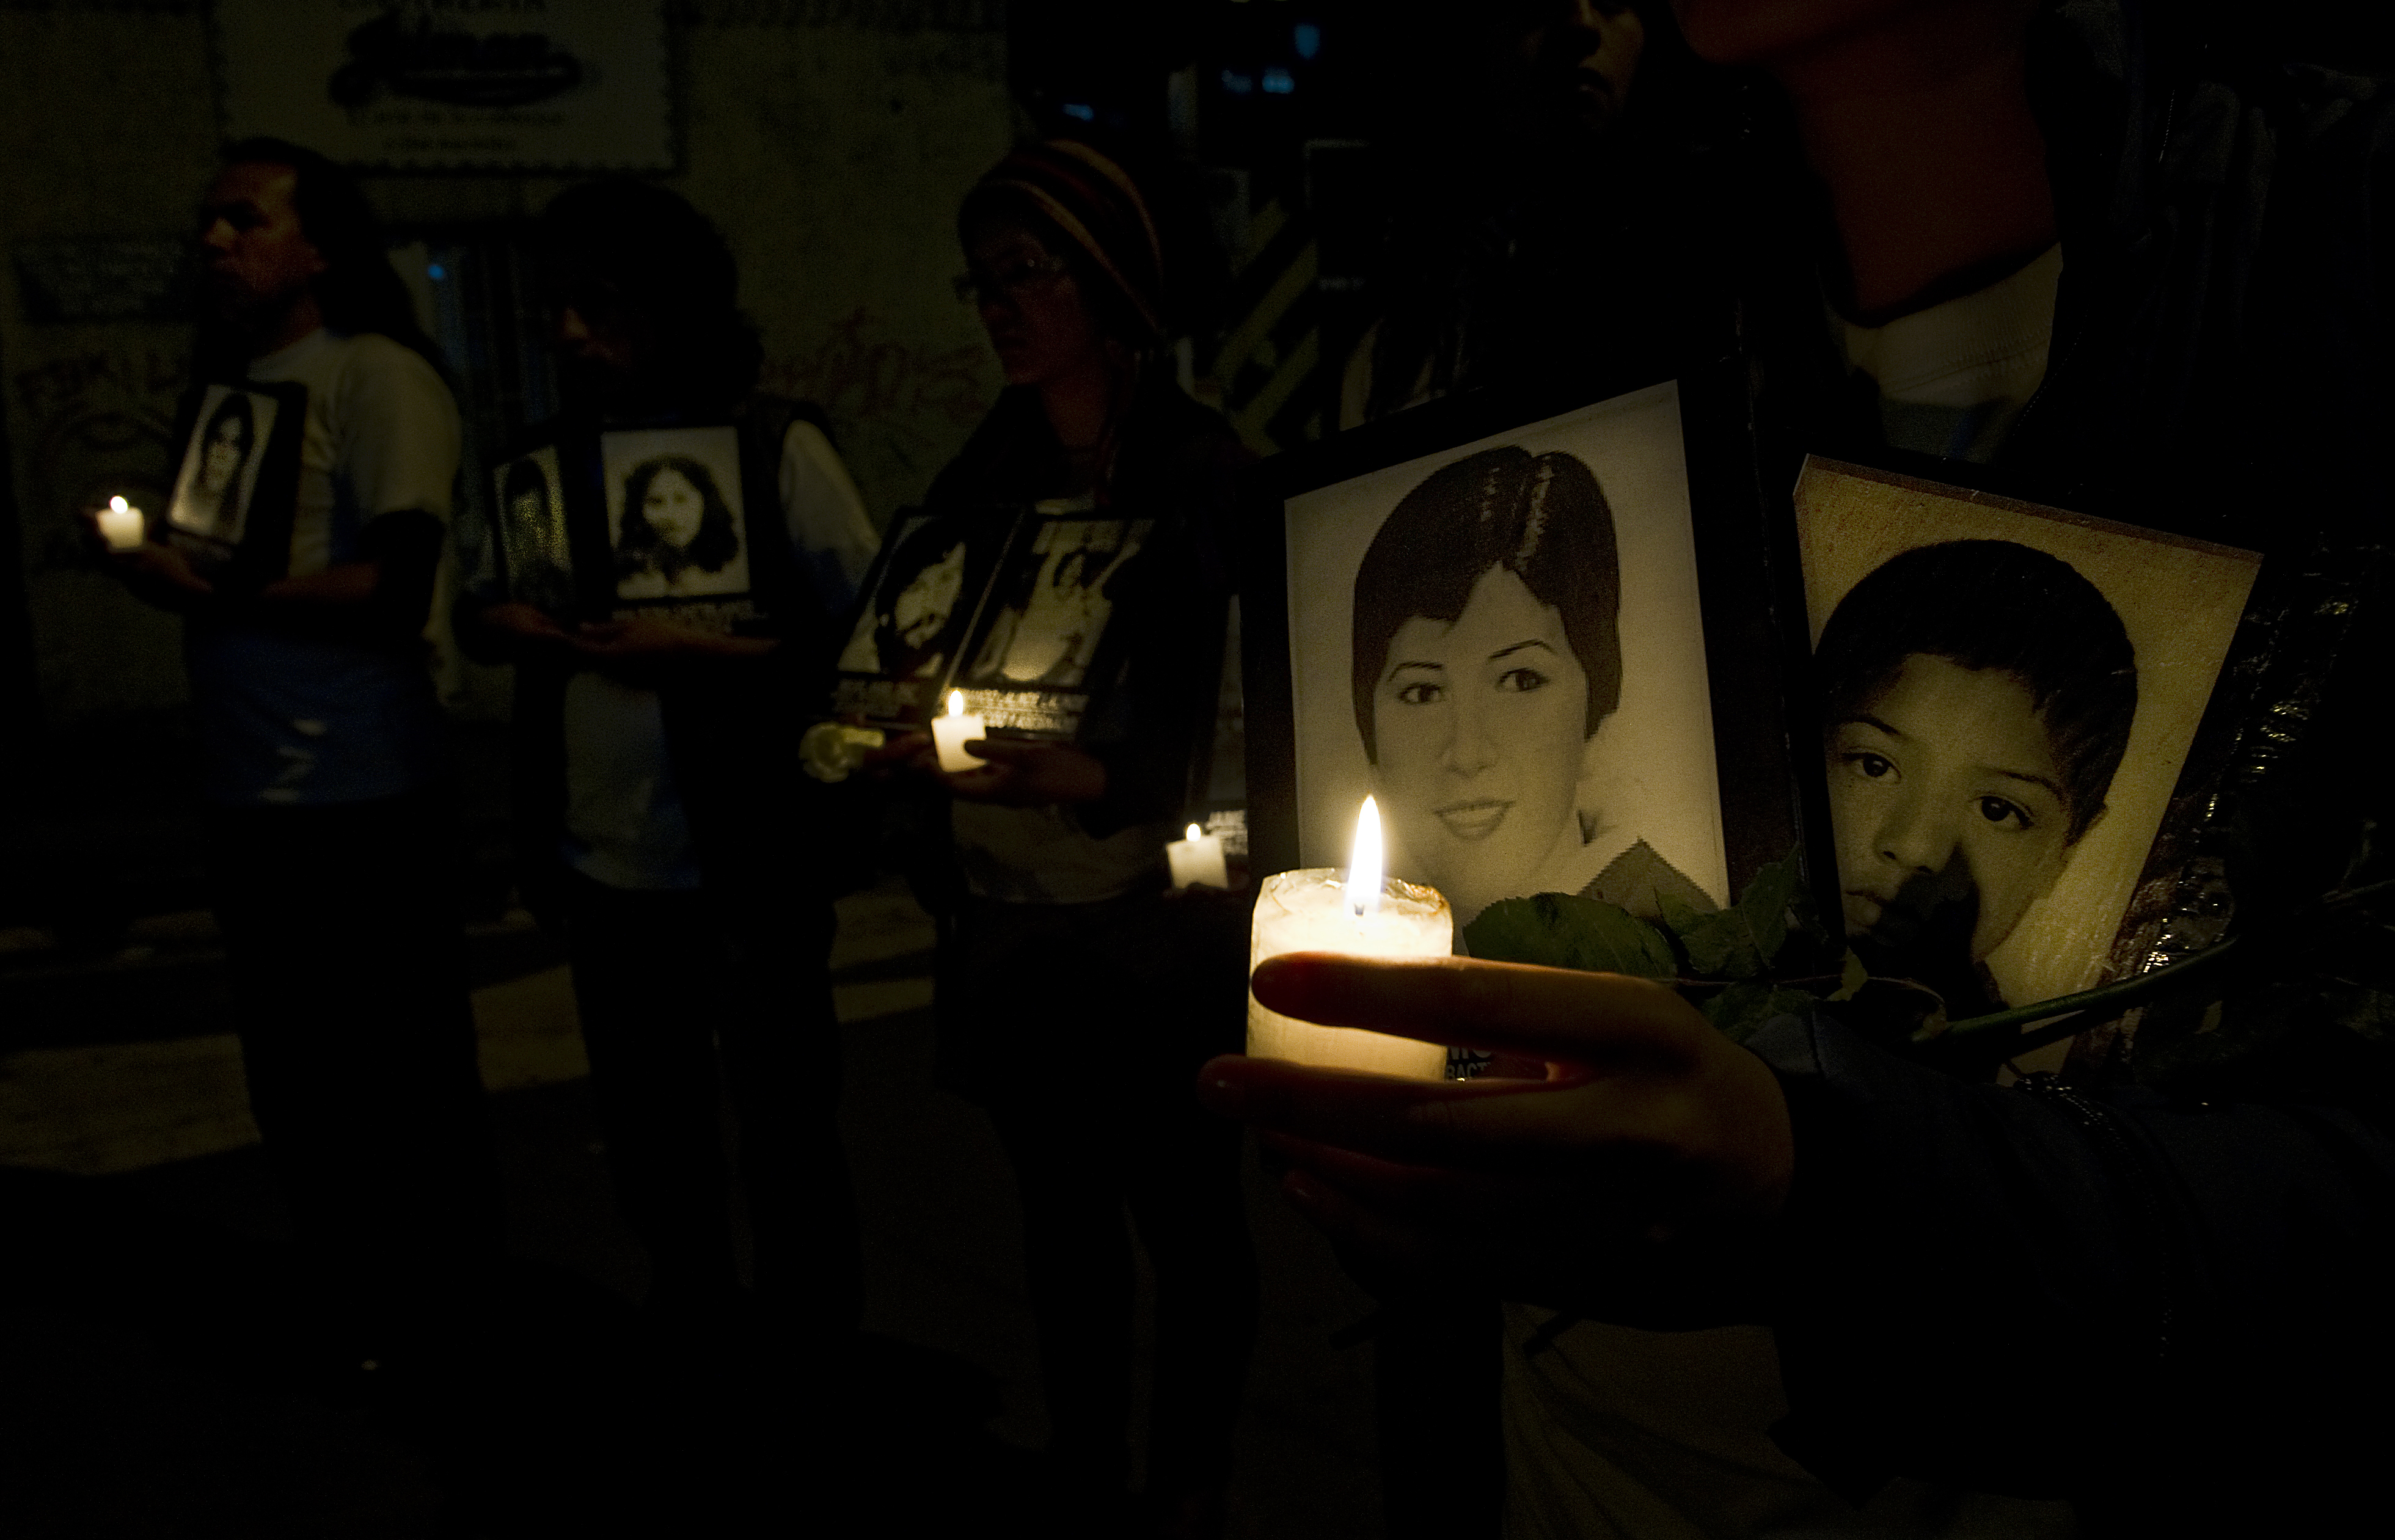 Relatives of missing persons in Colombia hold photographs and candles during a protest in Bogota on May 26, 2011. The drama of enforced disappearance in Colombia has reached numbers that the representative in Colombia of the United Nations High Commissioner for Human Rights, Christian Salazar, described as "chilling". At least 26,500 cases have been reported to the prosecutor. AFP PHOTO/Luis Acosta (Photo credit should read LUIS ACOSTA/AFP/Getty Images)